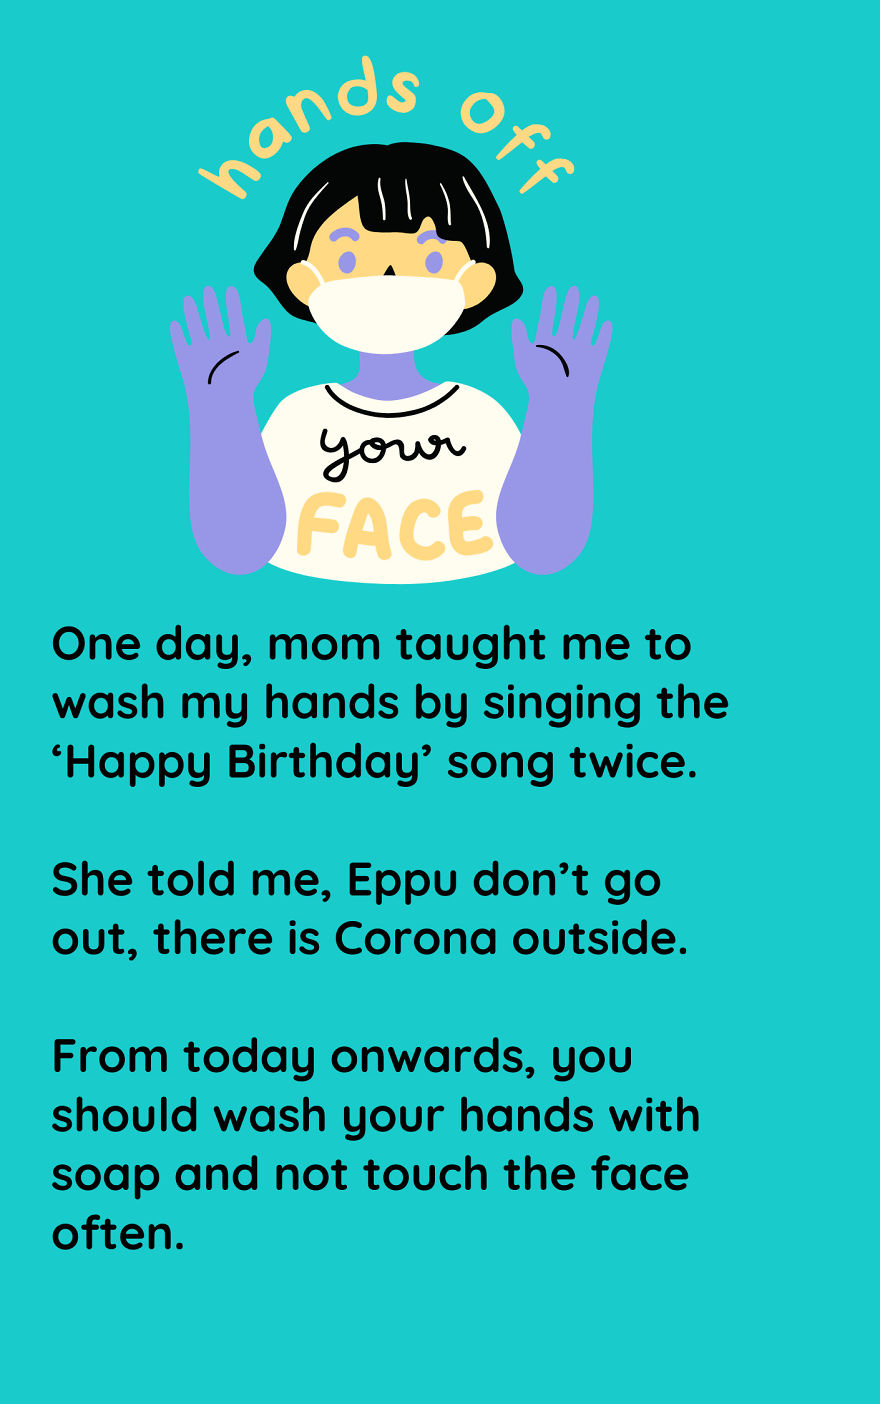 Our Children's Illustration Ebook Focuses On Our 3-Year-Old Kid's Thoughts During Coronavirus